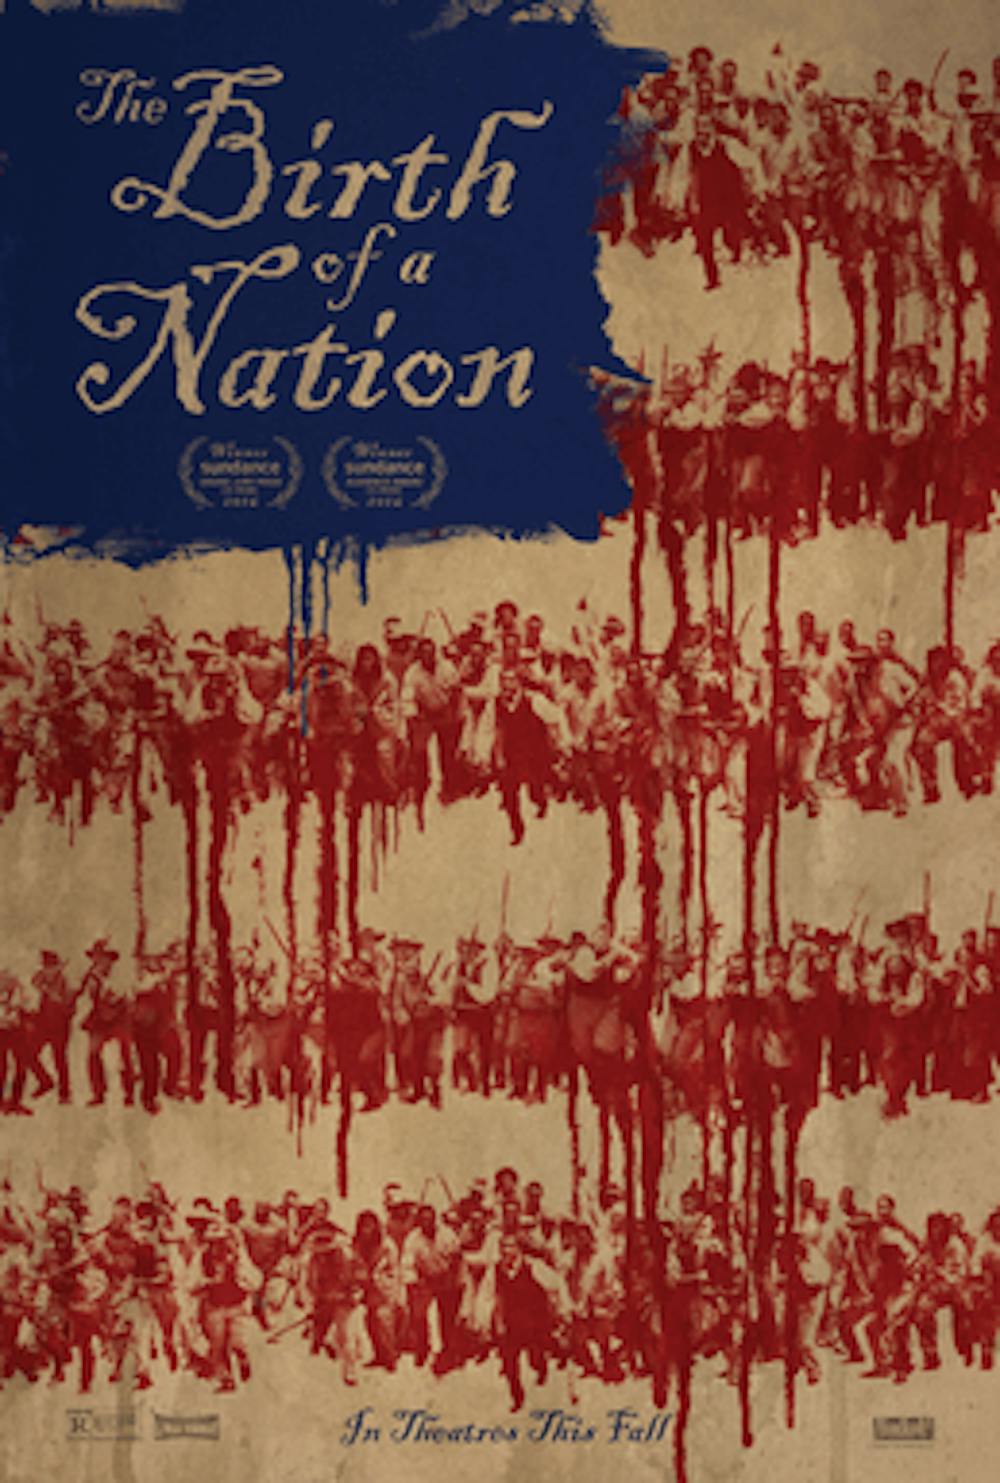 <p>"The Birth of a Nation" sheds light on the life of slaves in early America.</p>